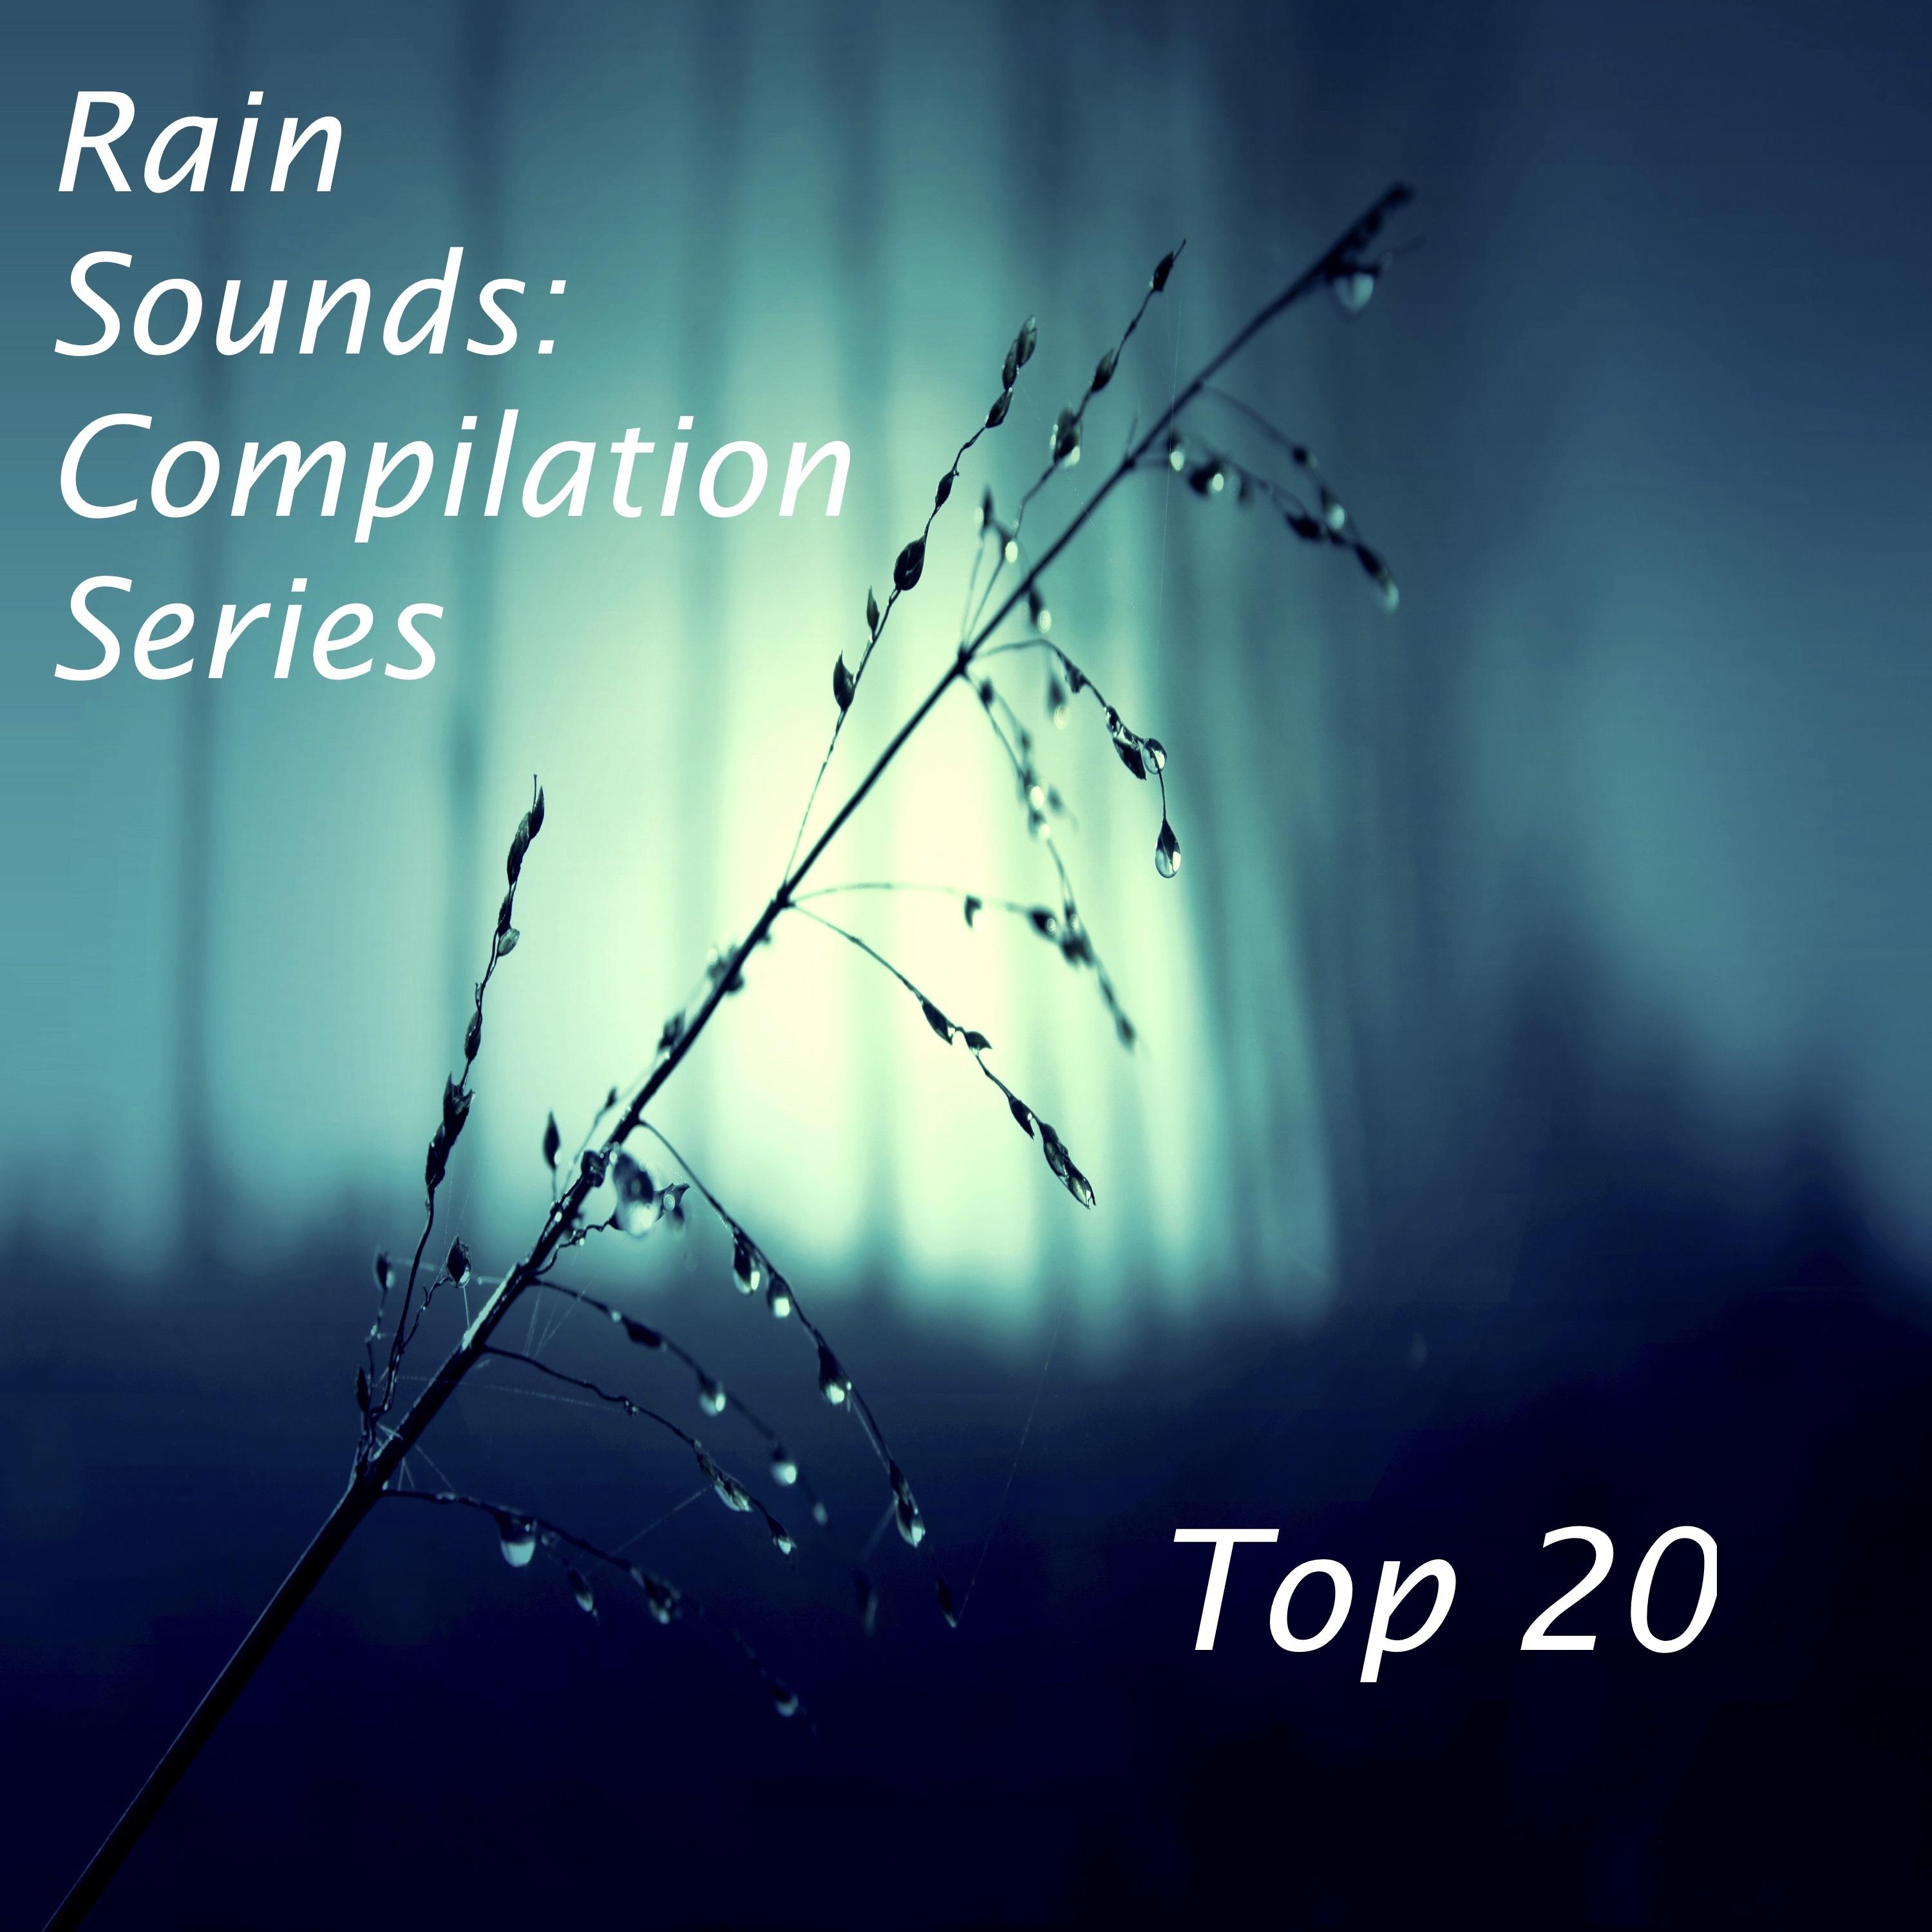 2017 Compilation: Top 20 Loopable Rain Sounds for Deep Sleep, Insomnia, Meditation and Relaxation